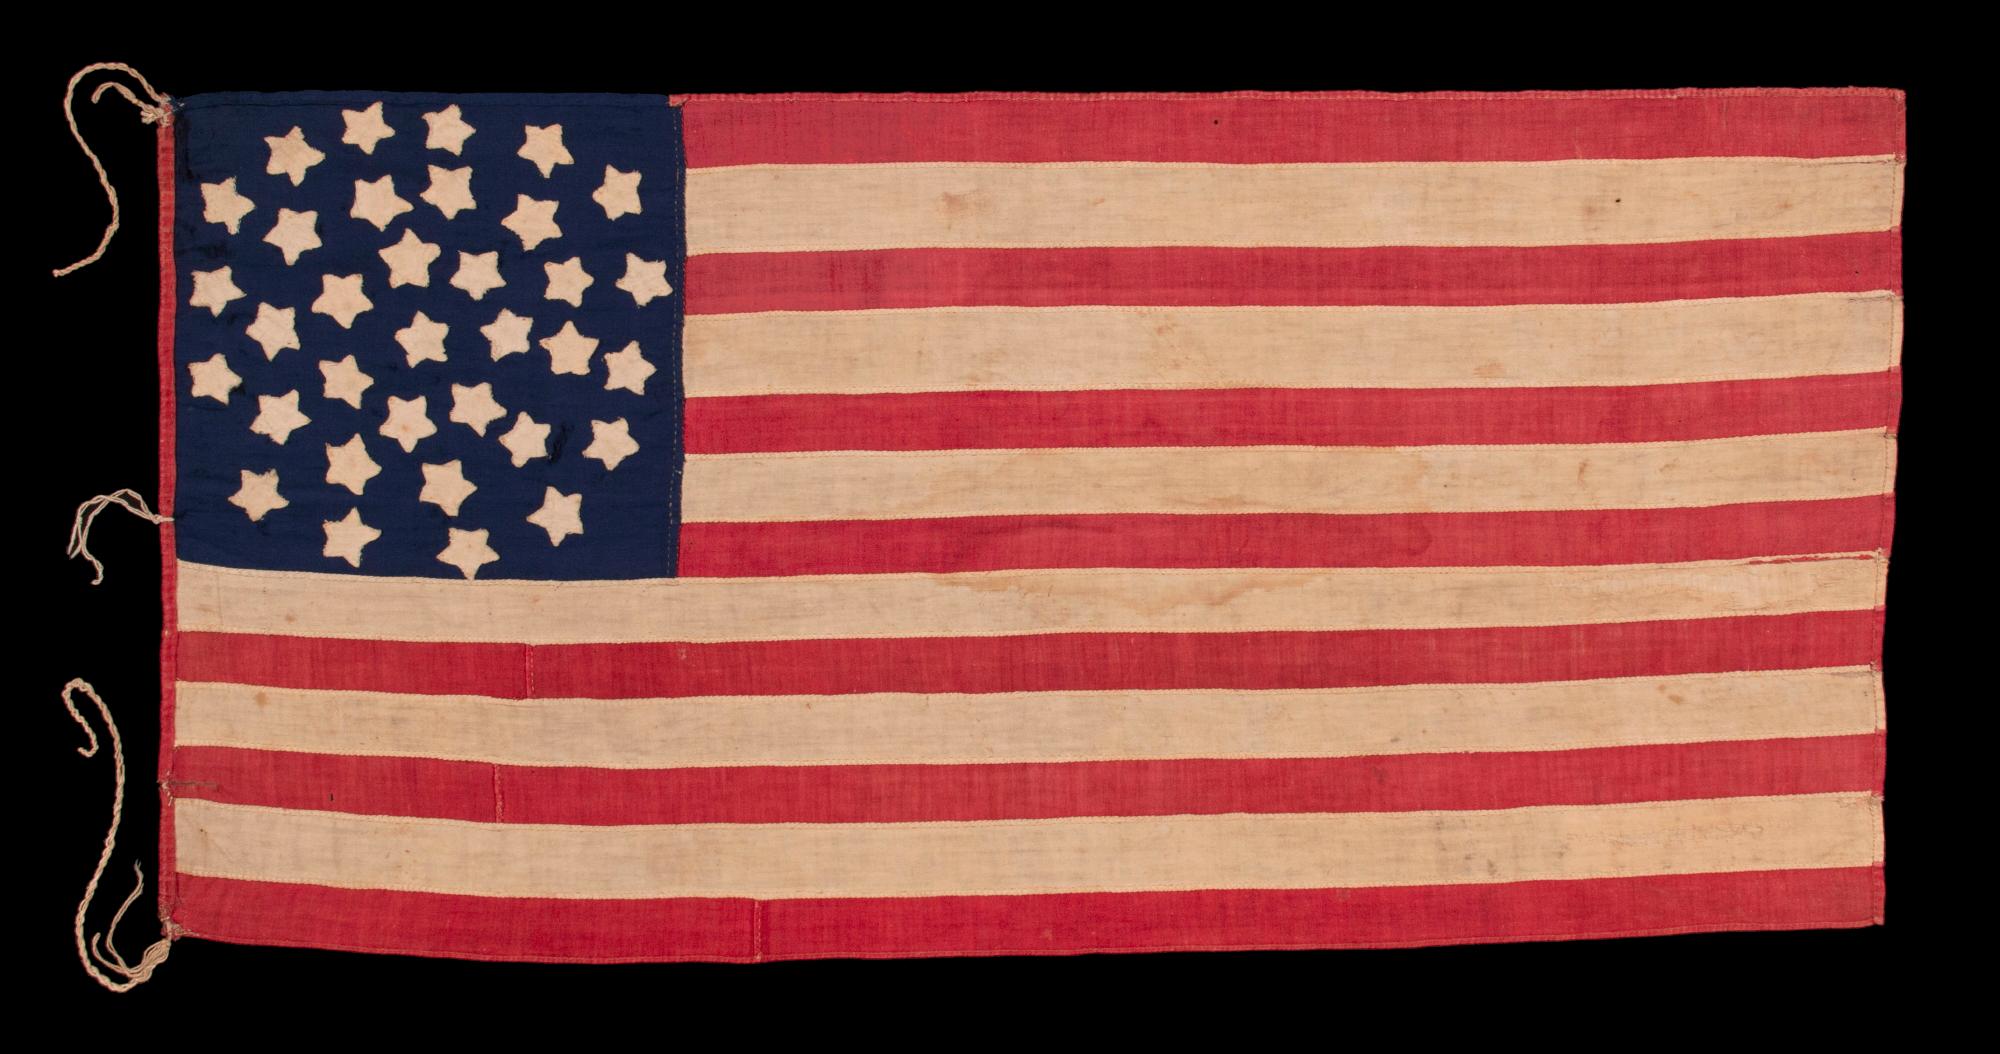 34 STAR ANTIQUE AMERICAN FLAG OF THE CIVIL WAR PERIOD (1861-63), IN A TINY SCALE AMONG PIECED-AND-SEWN FLAGS OF THE PERIOD, WITH A TRIPLE-WREATH CONFIGURATION, AN ELONGATED FORMAT, AND ENTIRELY HAND-SEWN;  FOUND WITH A LETTER FROM JOHN W. RUDE OF